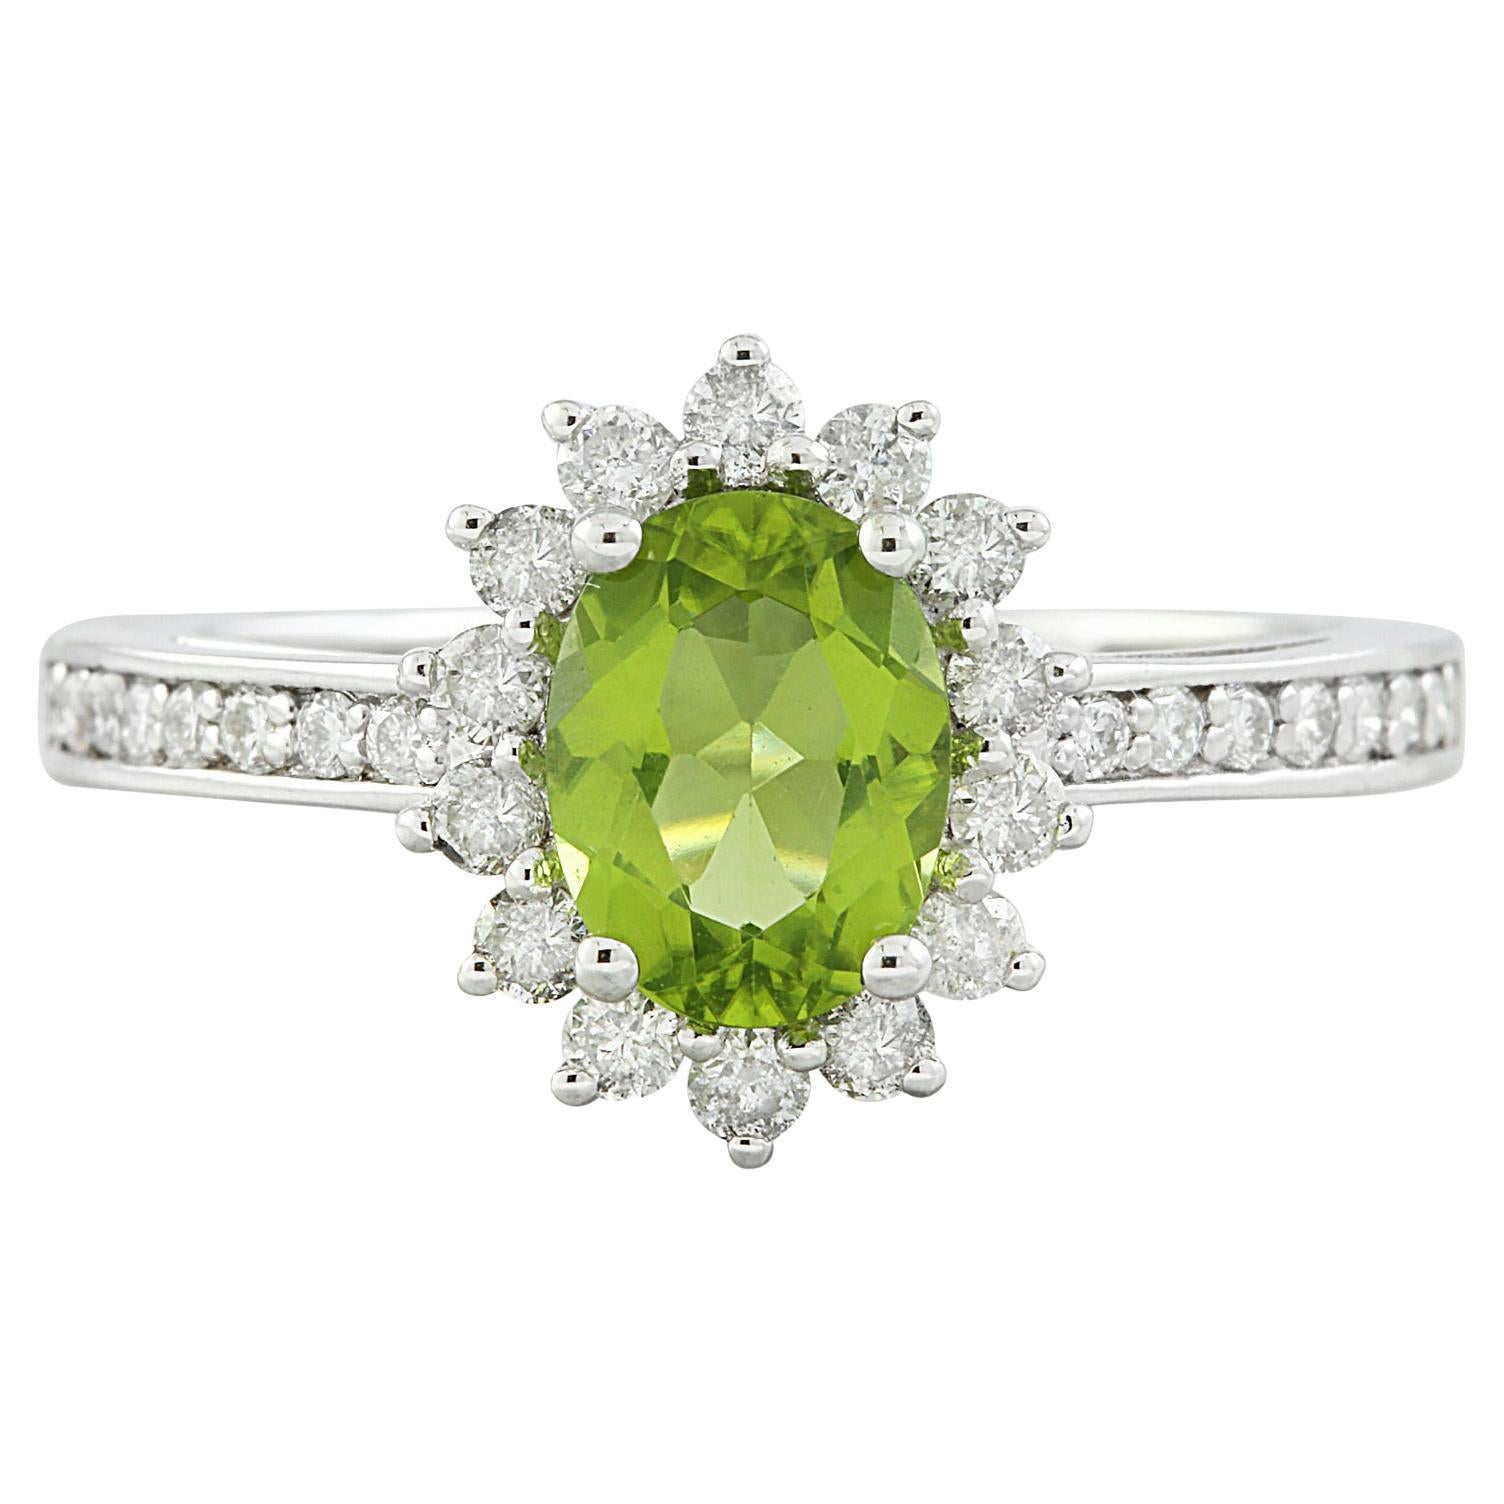 Natural Peridot Diamond Ring: Exquisite Beauty in 14K Solid White Gold